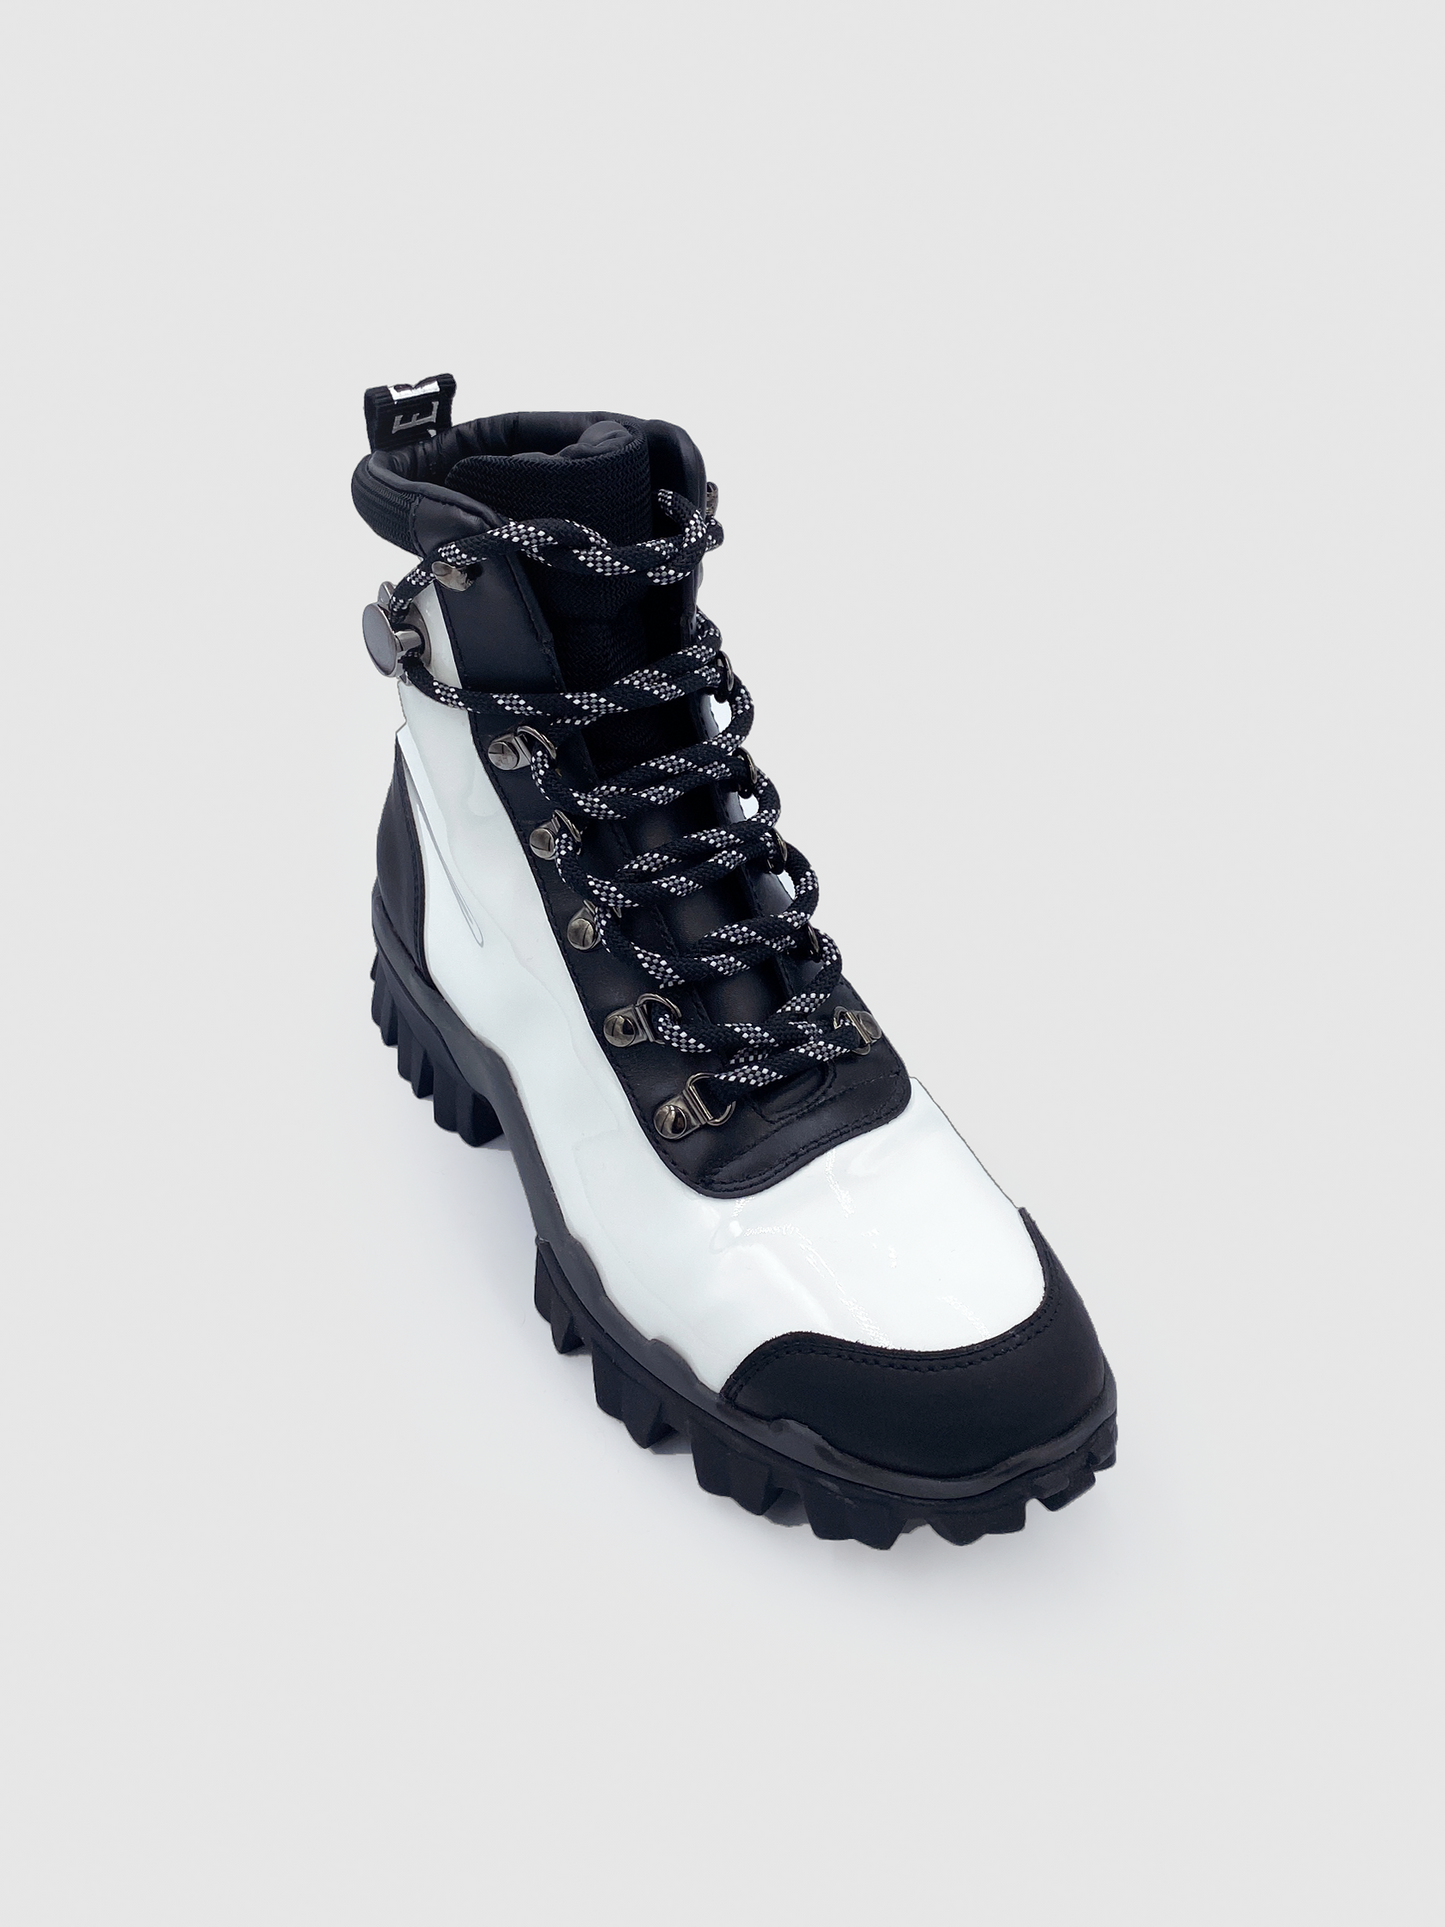 Moncler Black&White Patent Helis Hiking Boots - Size 5